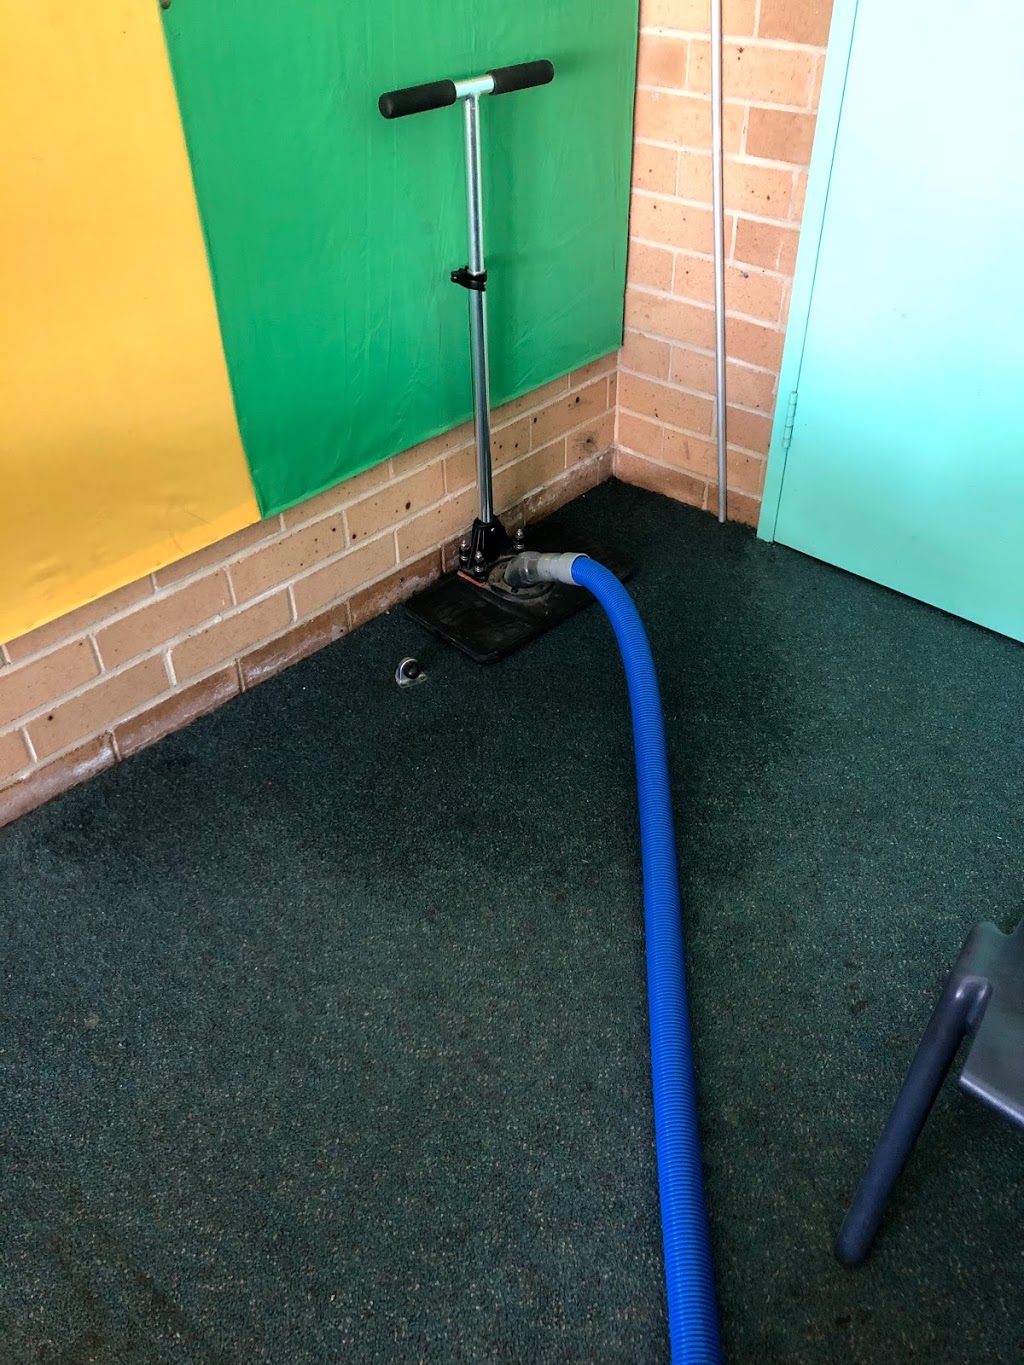 Keith Irvin Quick-Dry Carpet Cleaning | laundry | 18a Inglis St, Mudgee NSW 2850, Australia | 0263727658 OR +61 2 6372 7658